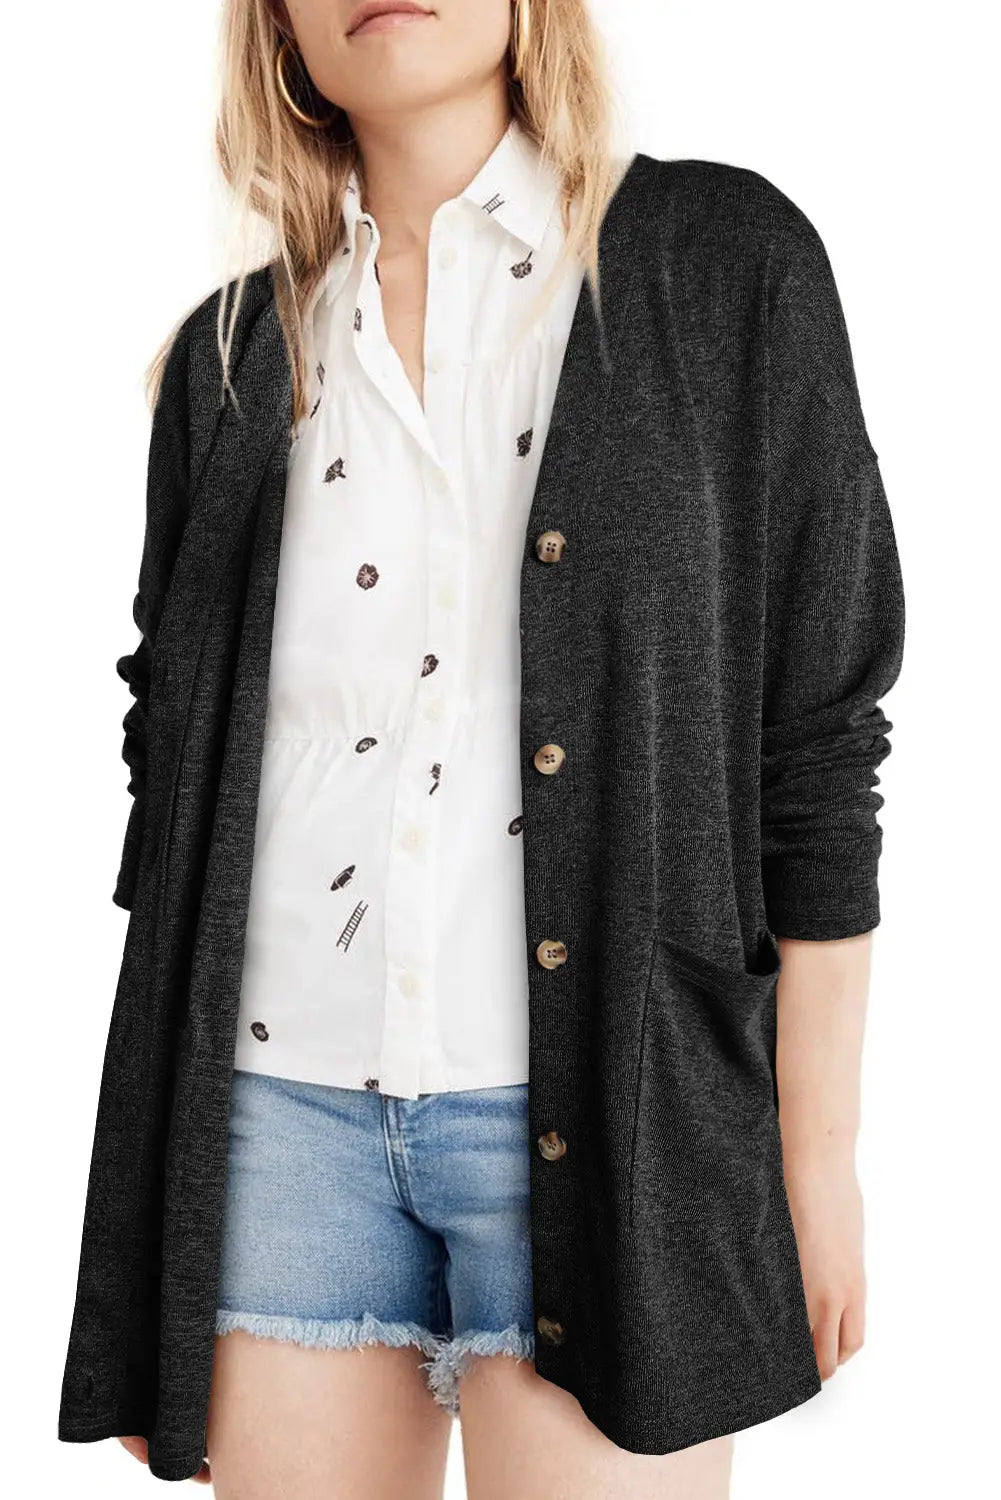 Black heather knit pocketed button front cardigan - sweaters & cardigans